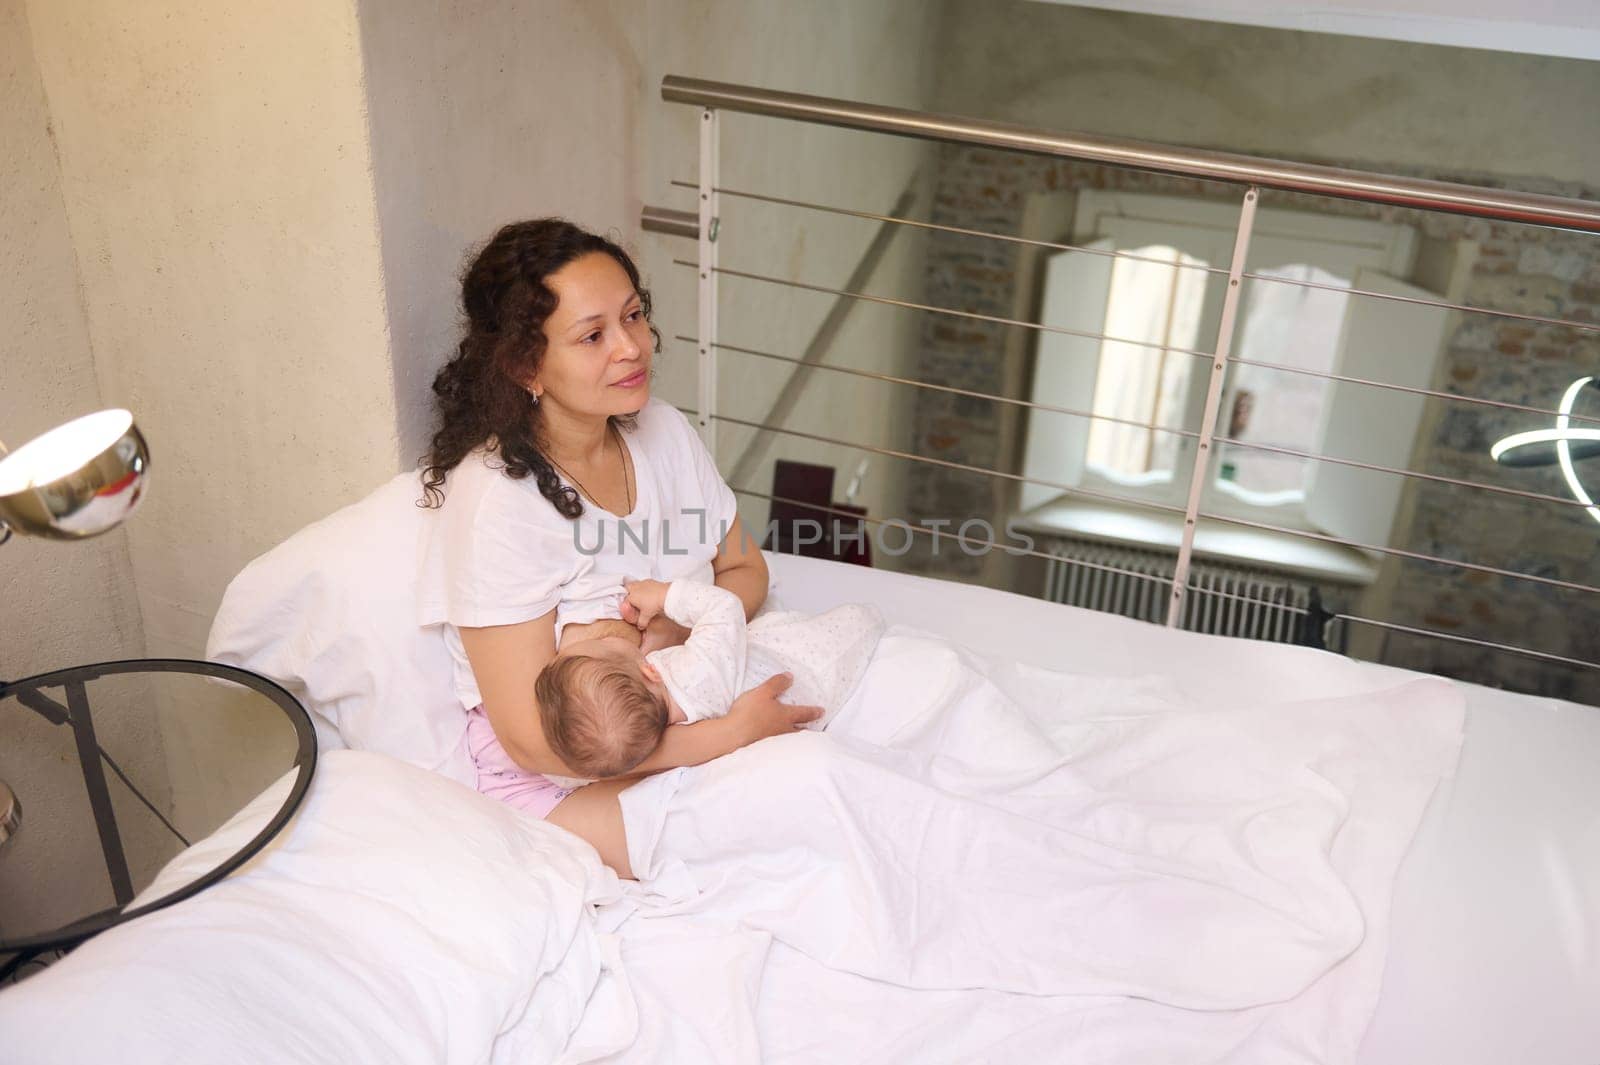 View from above of loving caring mother and her cute newborn baby. Happy mother sitting on the bed in cozy home interior, smiles looking at her baby boy while breastfeeding him. Tenderness. Love. Care